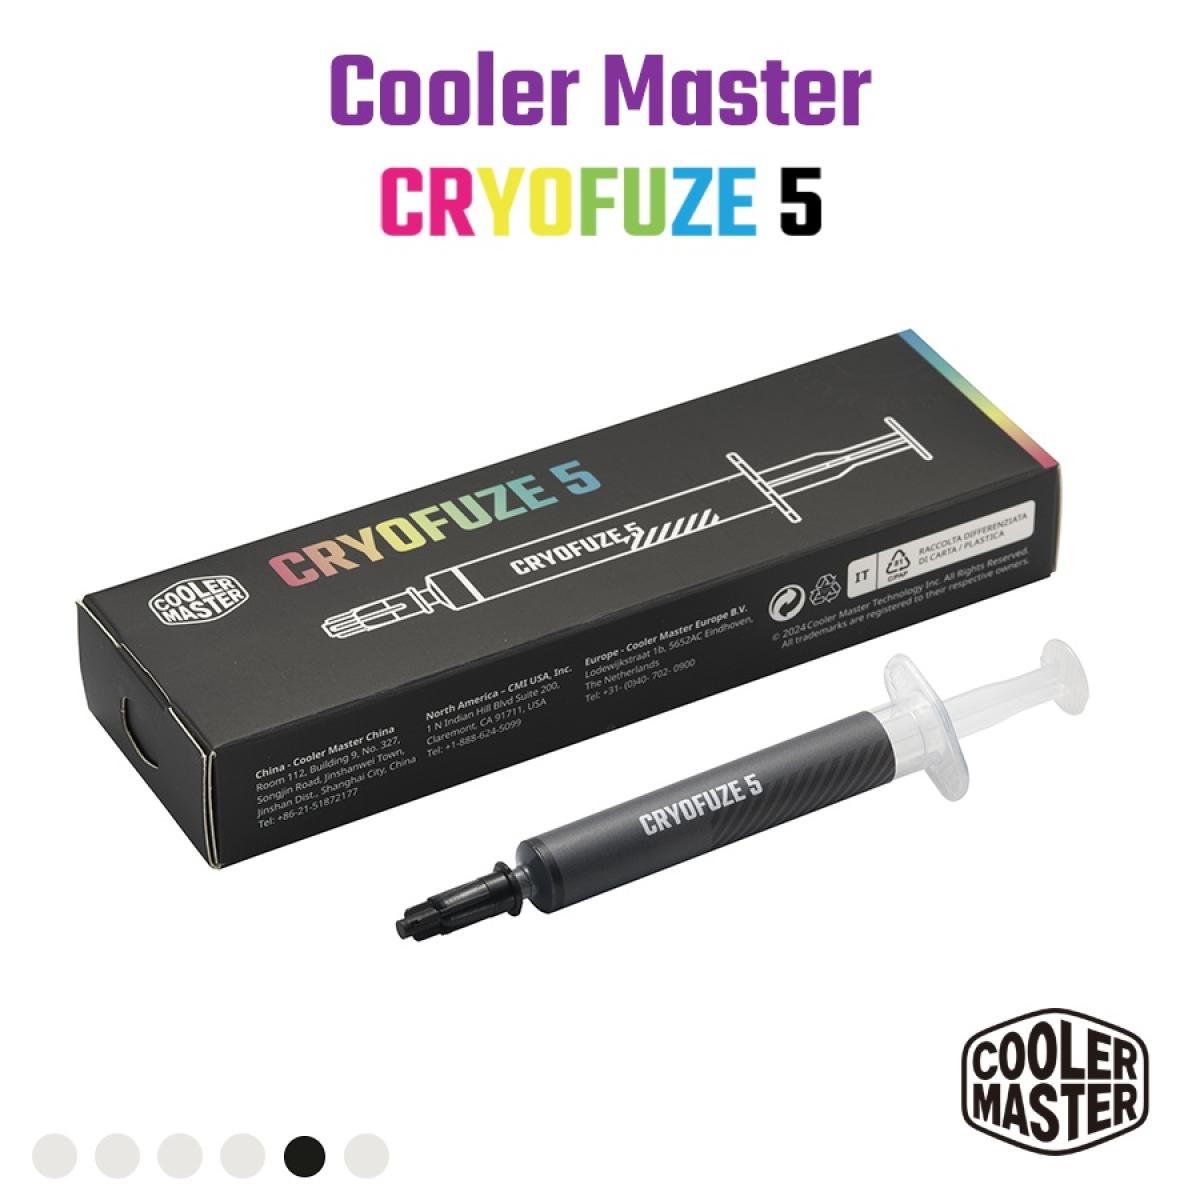 Cooler Master CRYOFUZE 5 (Black) High performance Thermal Paste, 12.6 W/mK High Thermal Conductivity w/ Low Thermal Impedance - 3g Weight